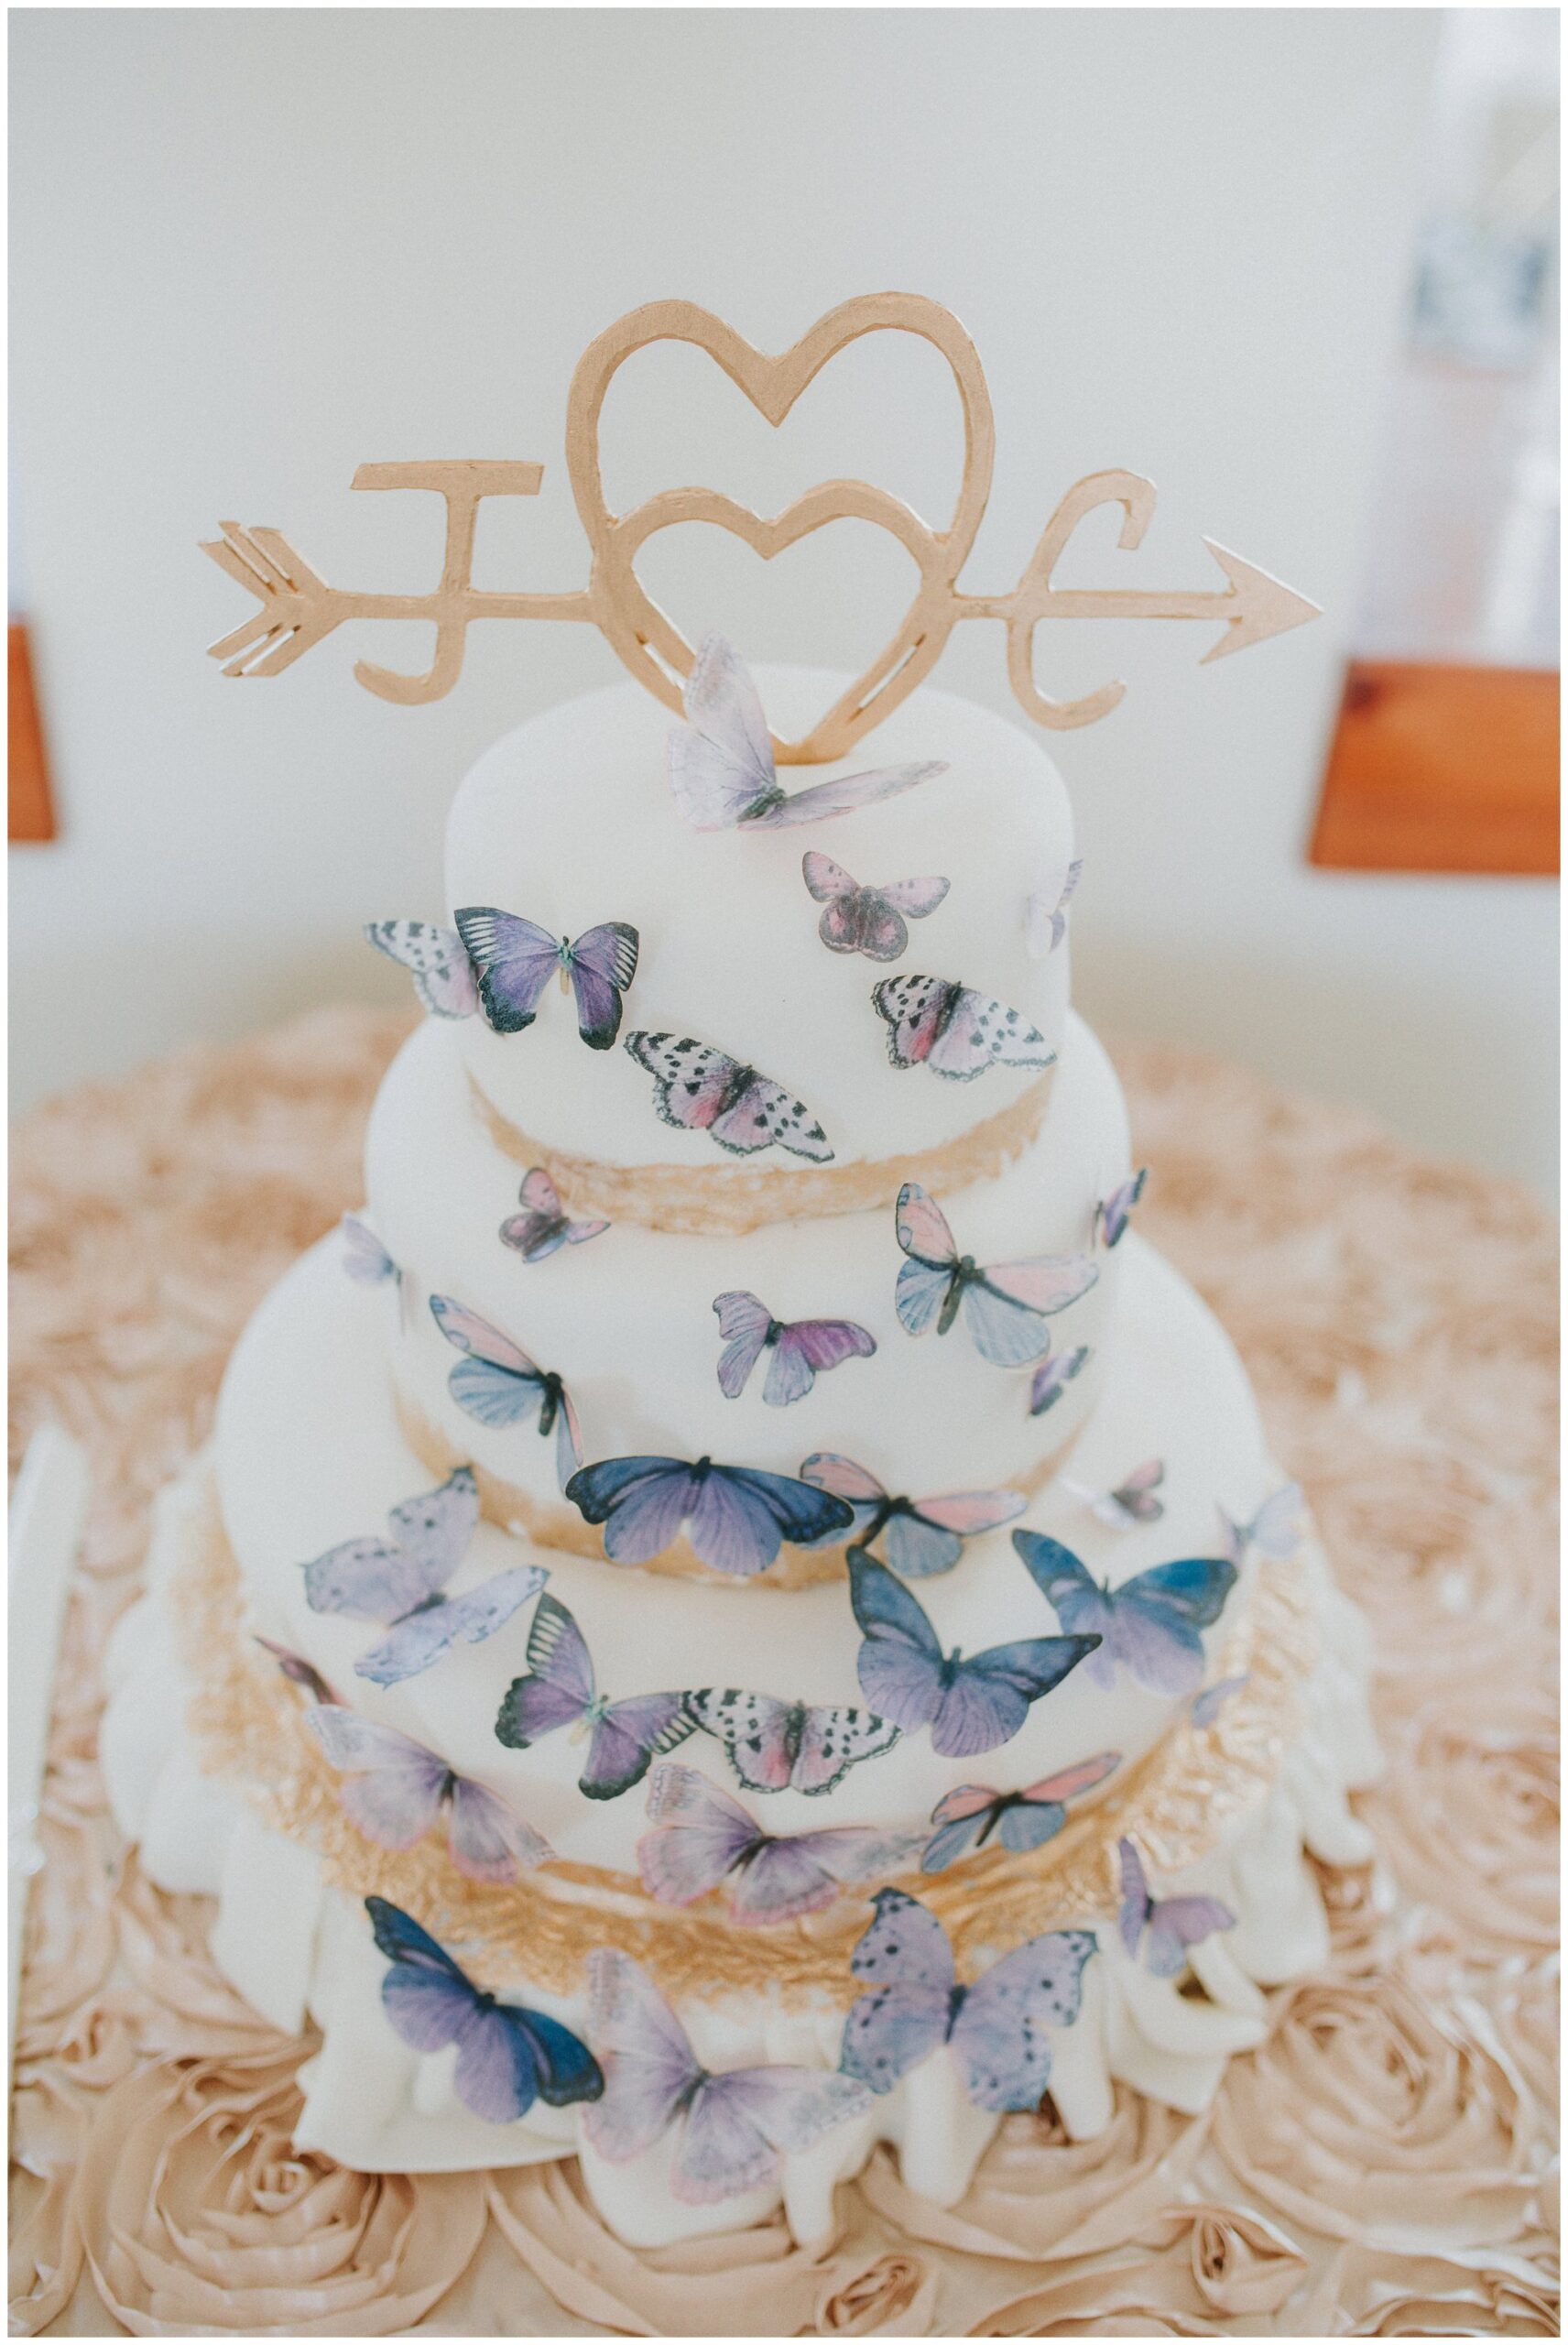 Christine made this cake topper from carved wood! Amazing!&nbsp;